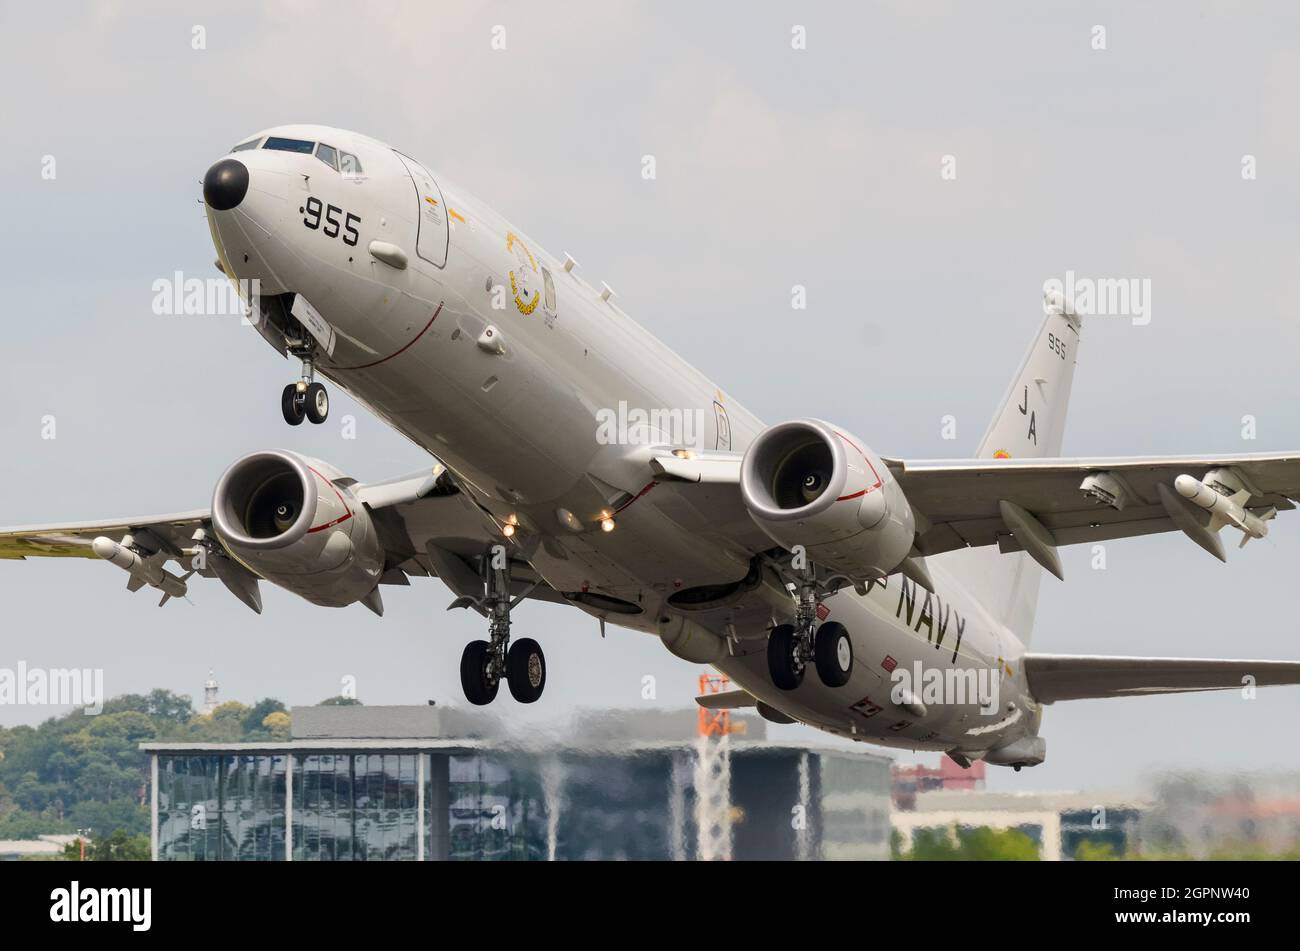 US Navy Boeing P-8 Poseidon military jet aircraft developed for the United States Navy, taking off to display at the Farnborough International Airshow Stock Photo